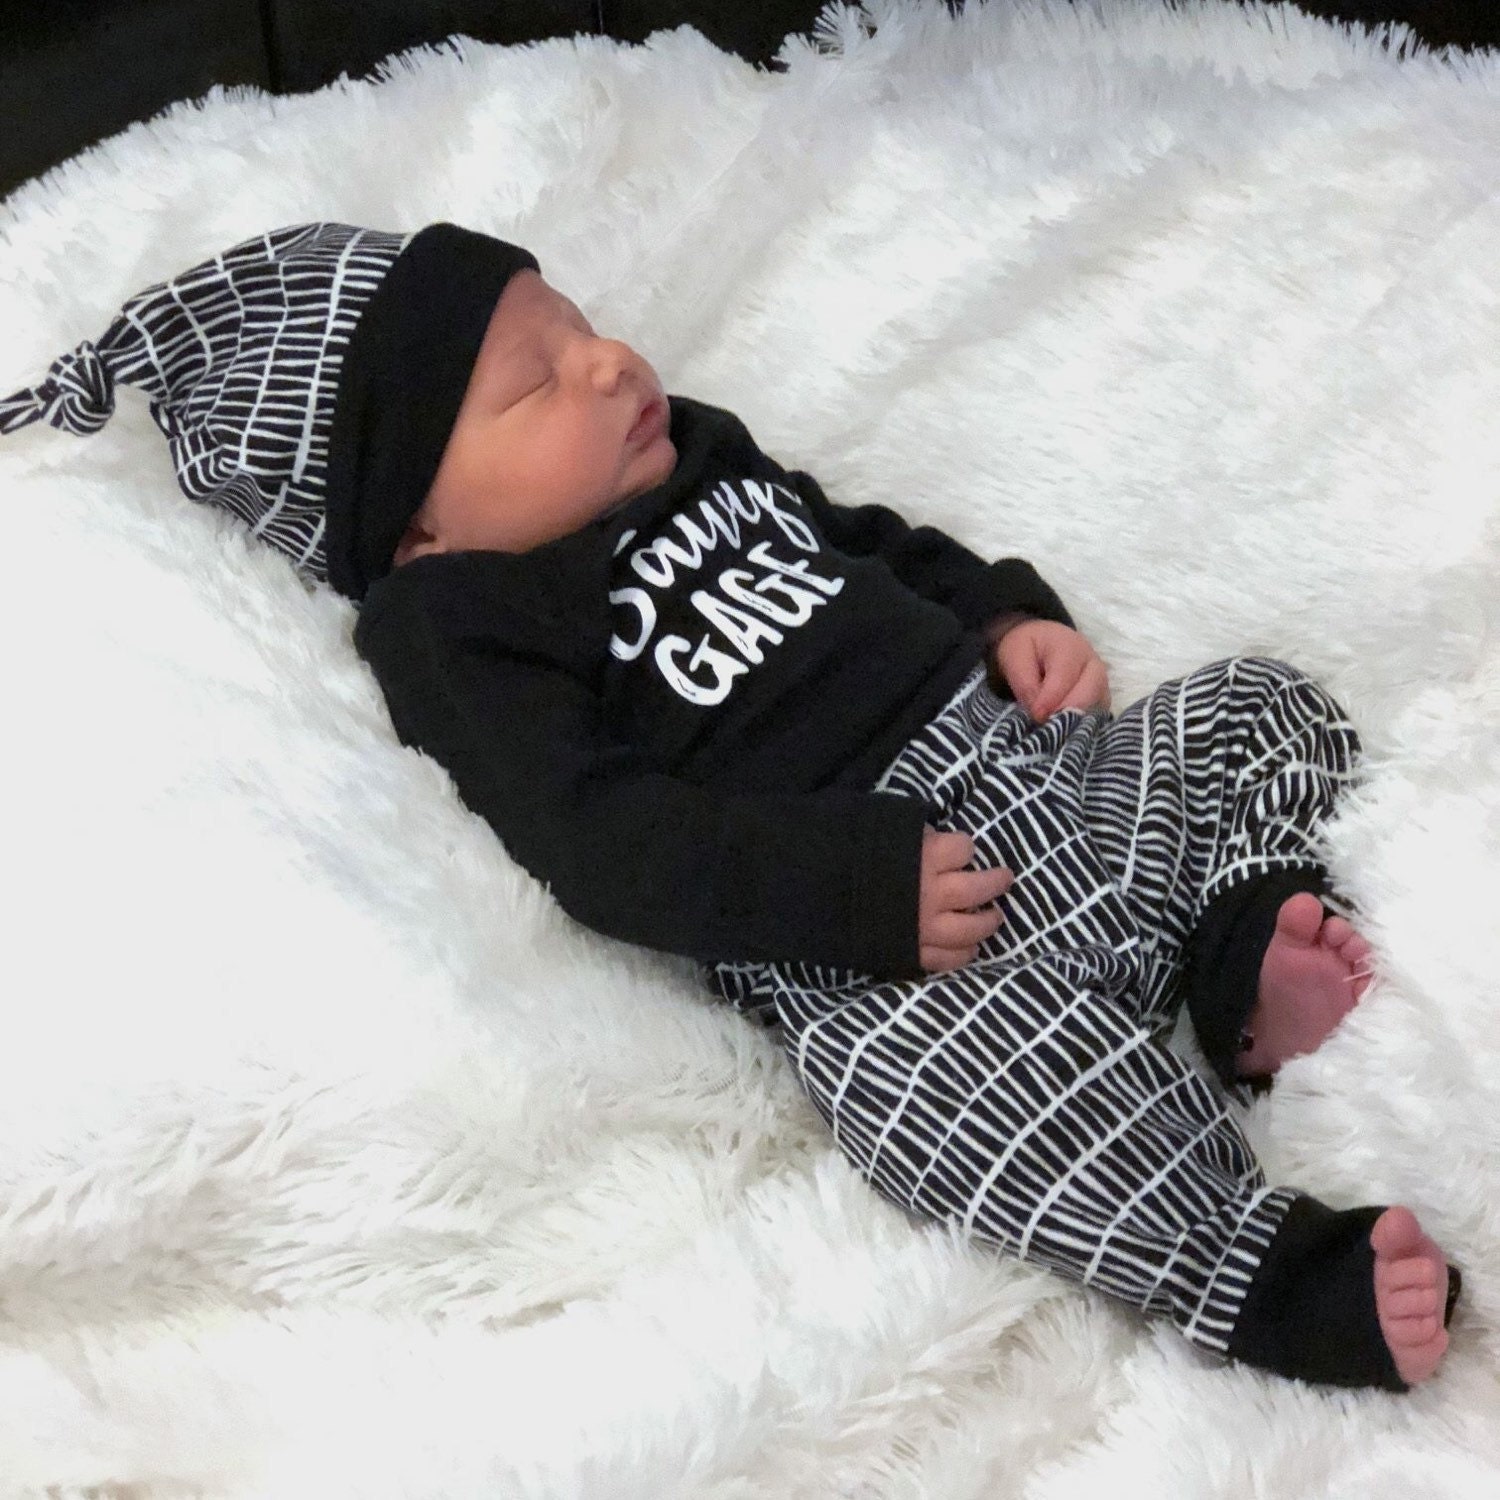 preemie boy coming home outfit